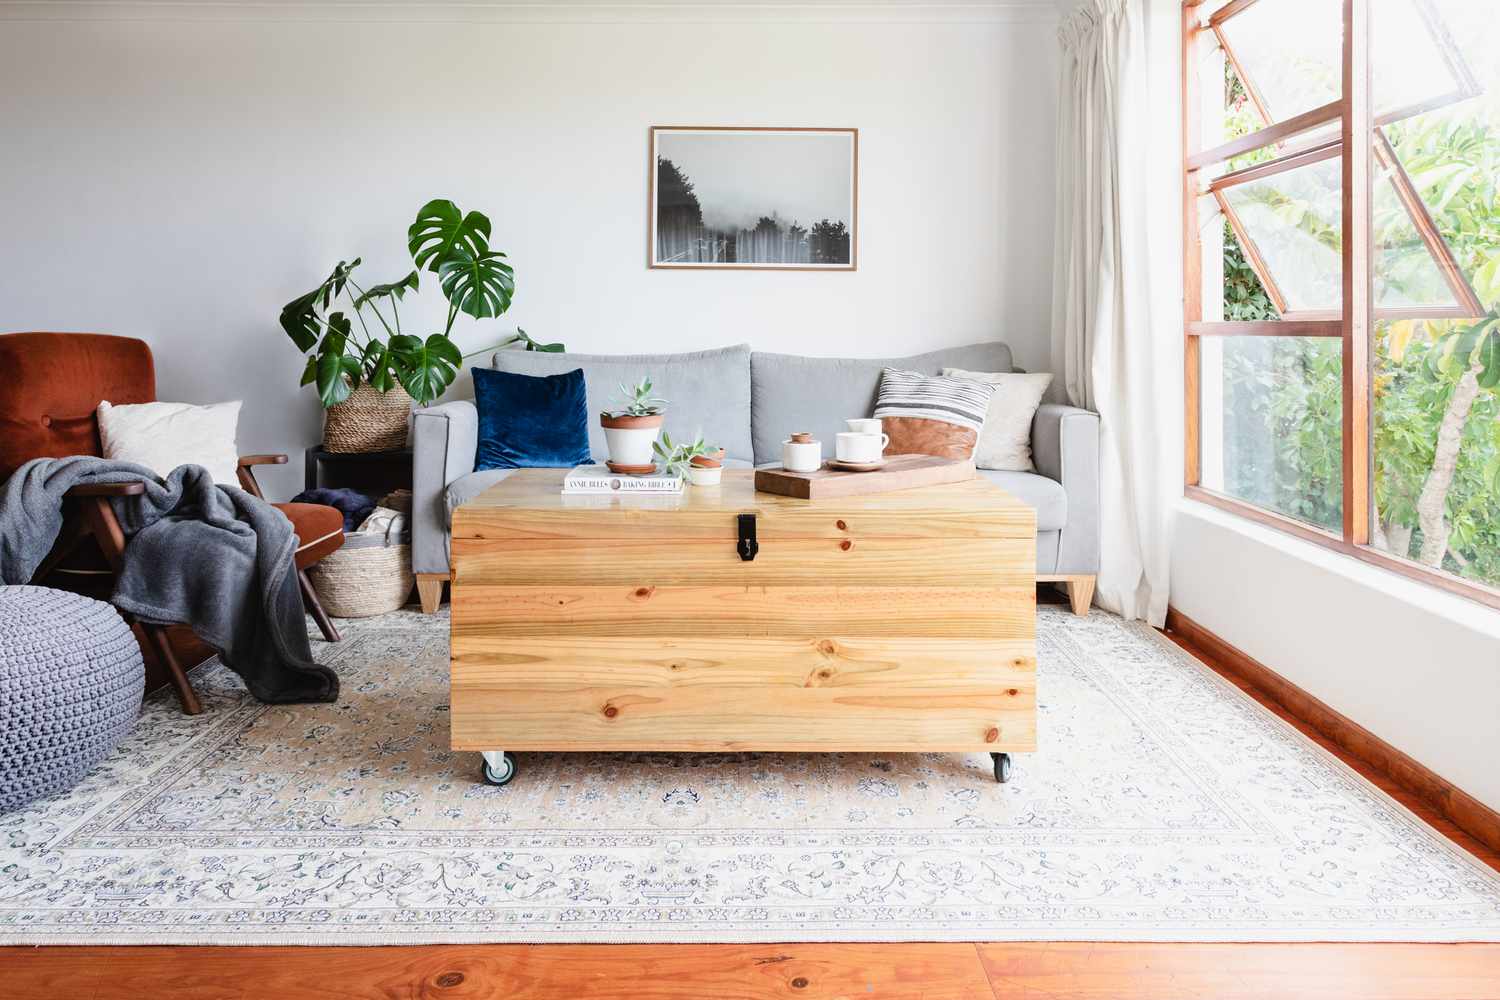 Light colored area rug in decorated living space under wooden trunk with wheels